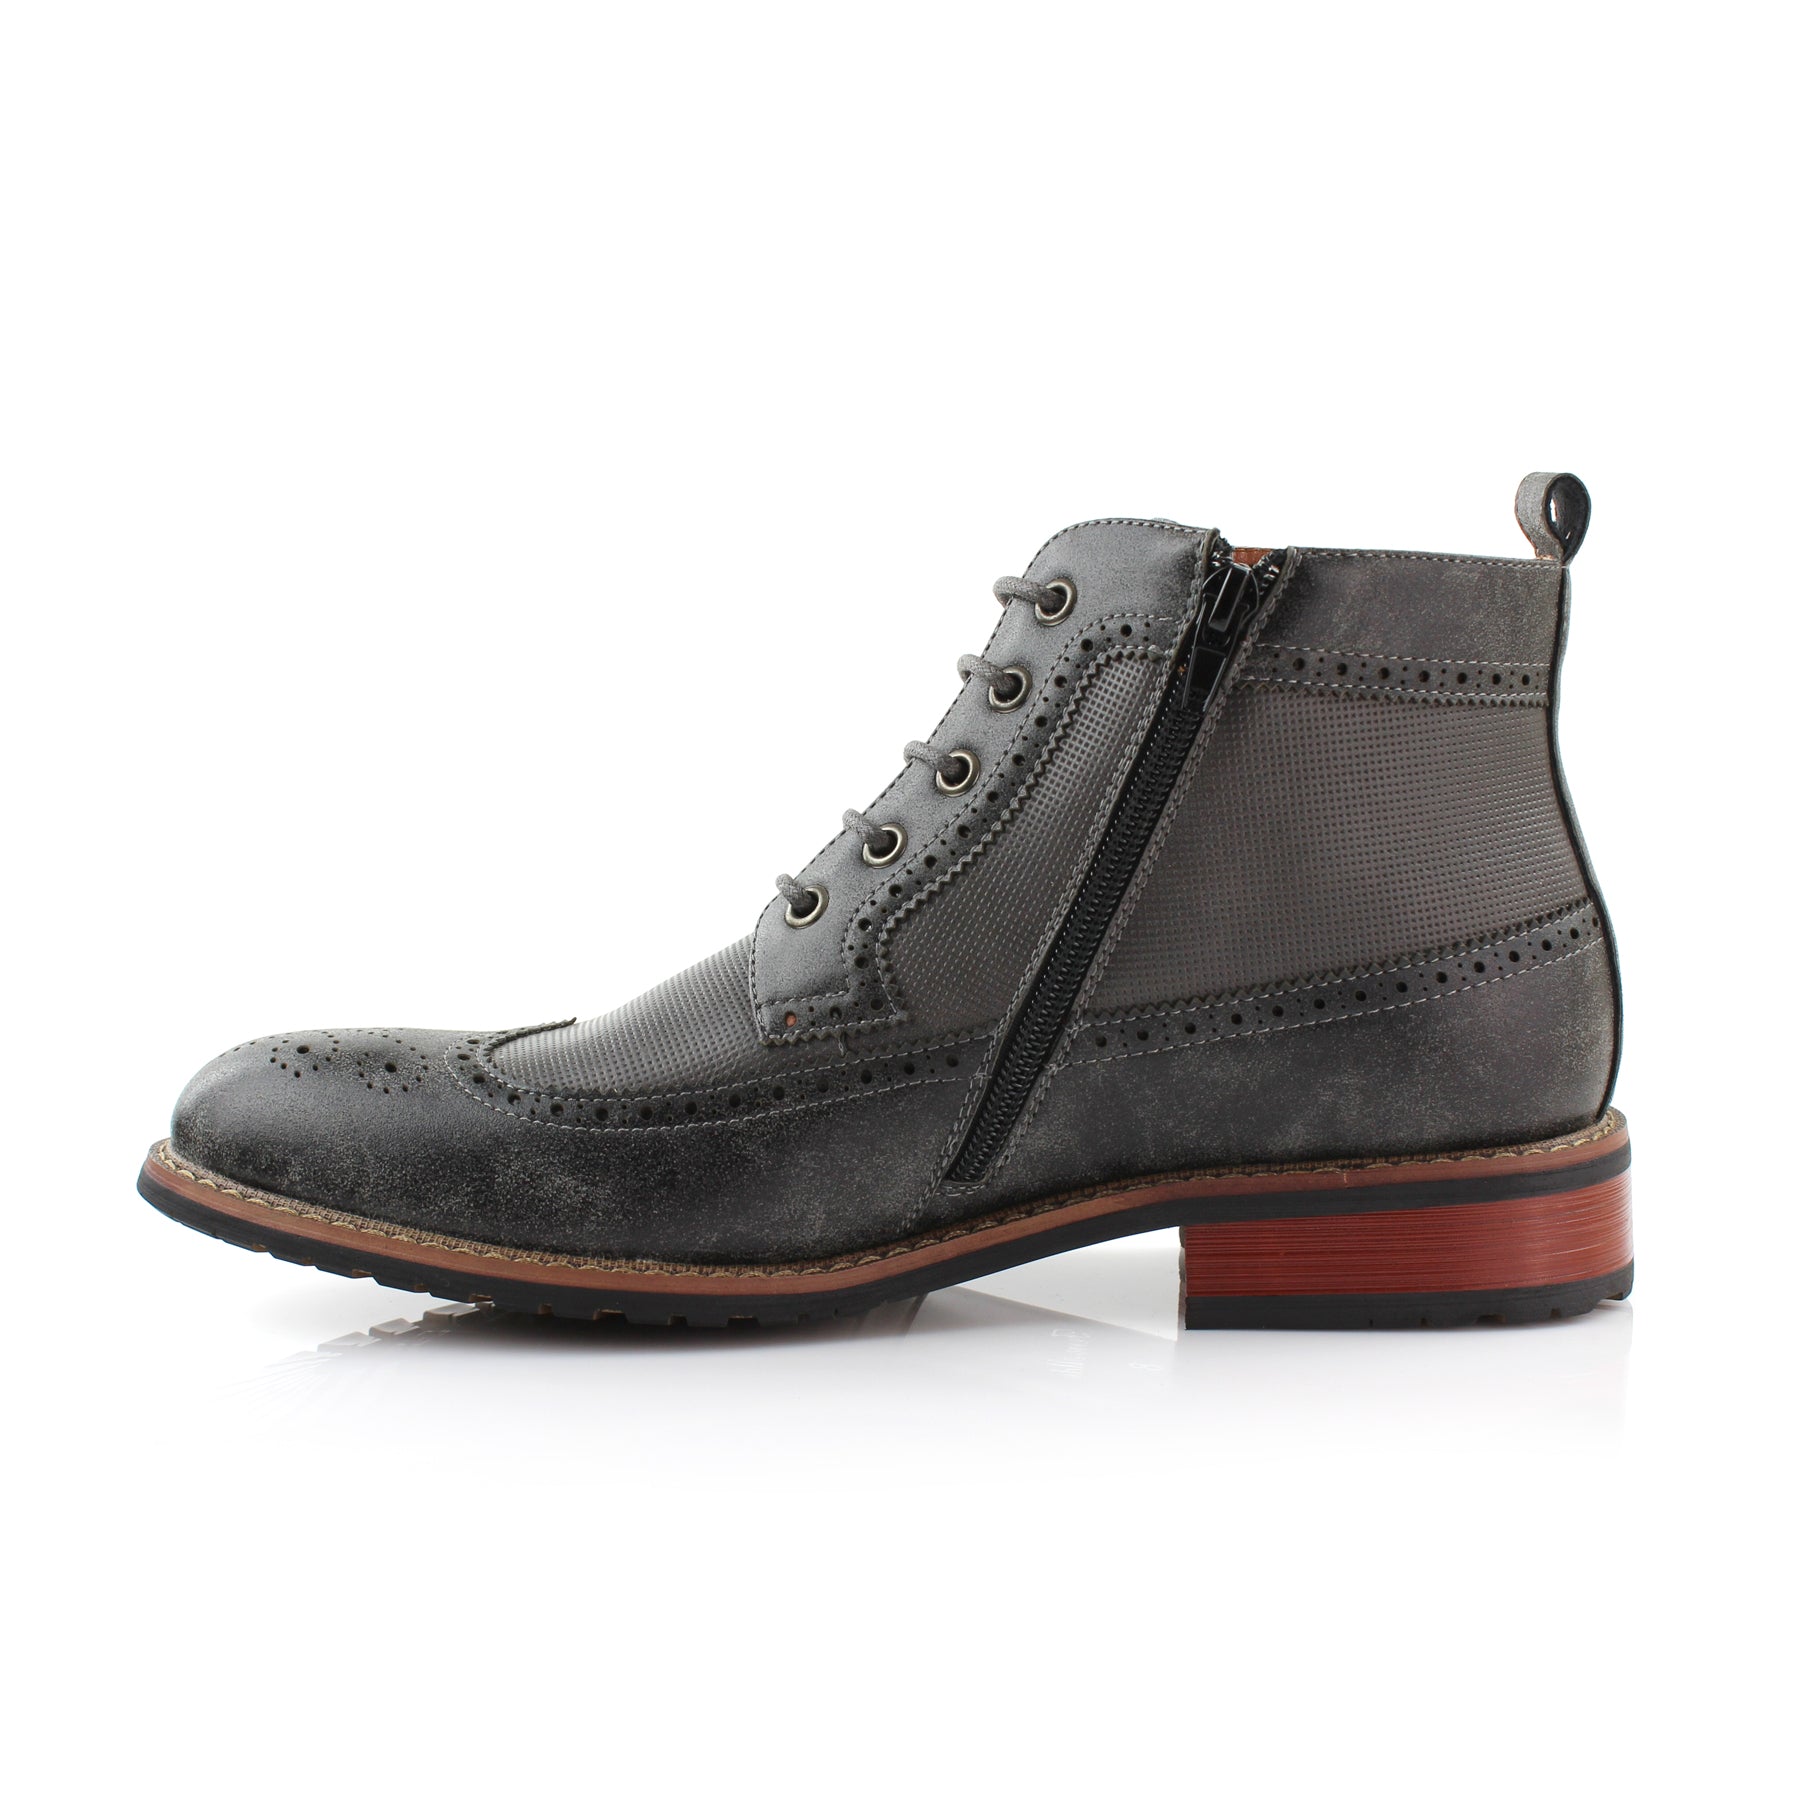 Burnished Brogue Wingtip Boots | Michael by Ferro Aldo | Conal Footwear | Inner Side Angle View